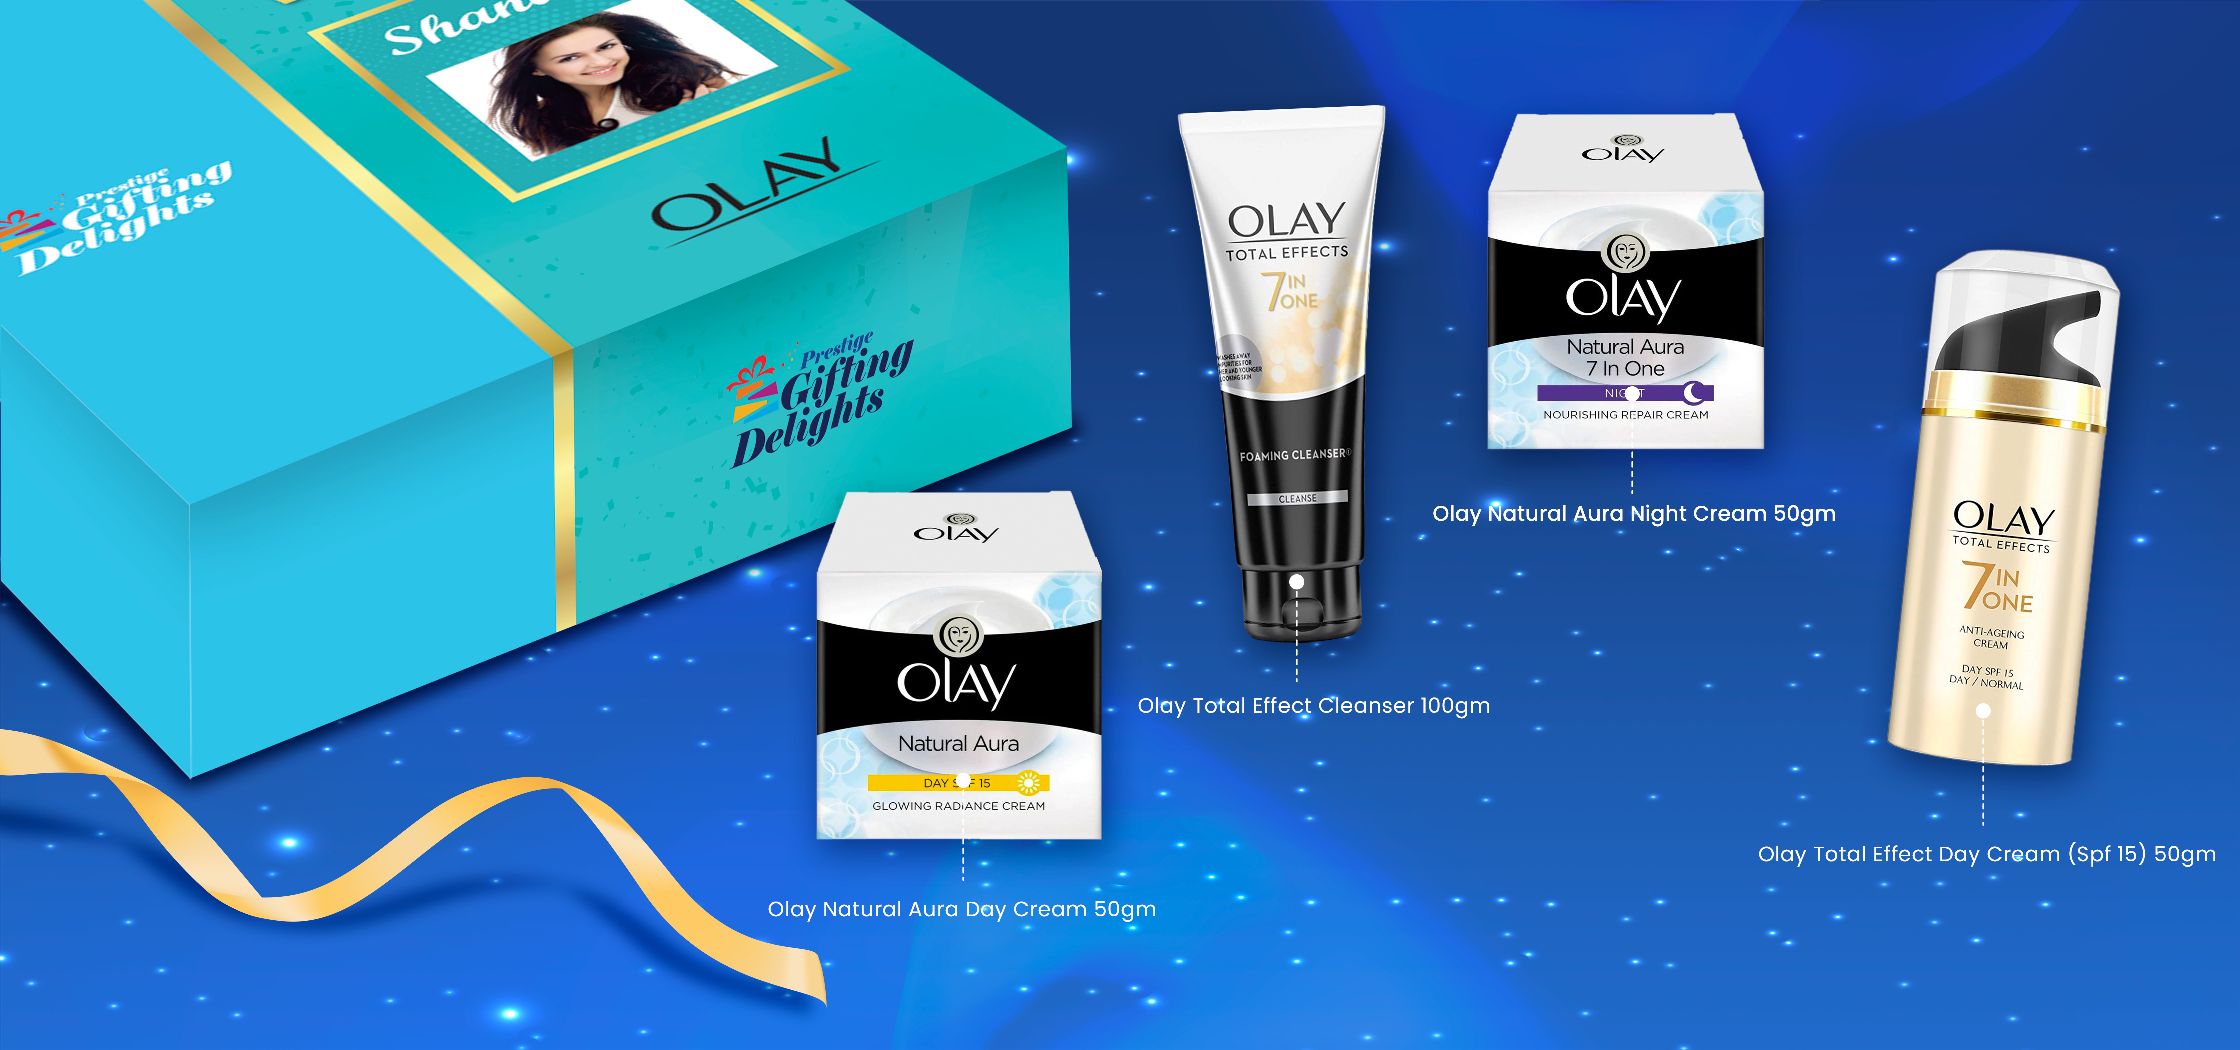 Olay All Day & Night Skincare Regimen Congratulations Gift Pack